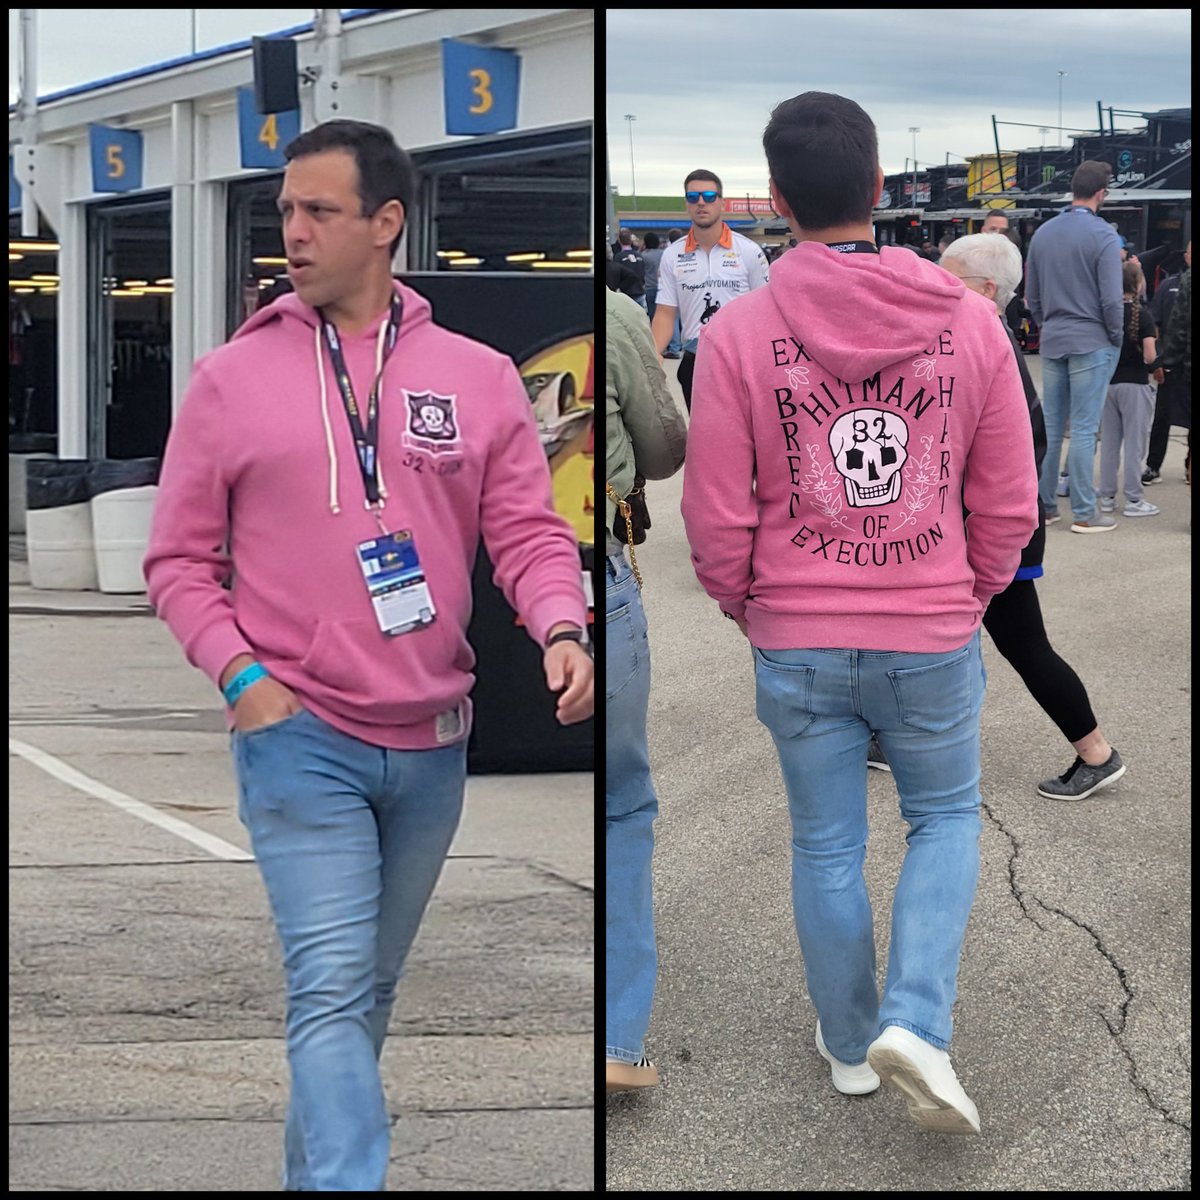 #Chiefs GM Brett Veach on hand for the ##adventhealth400 at Kansas Speedway wearing a Bret 'The Hitman' Hart jacket.